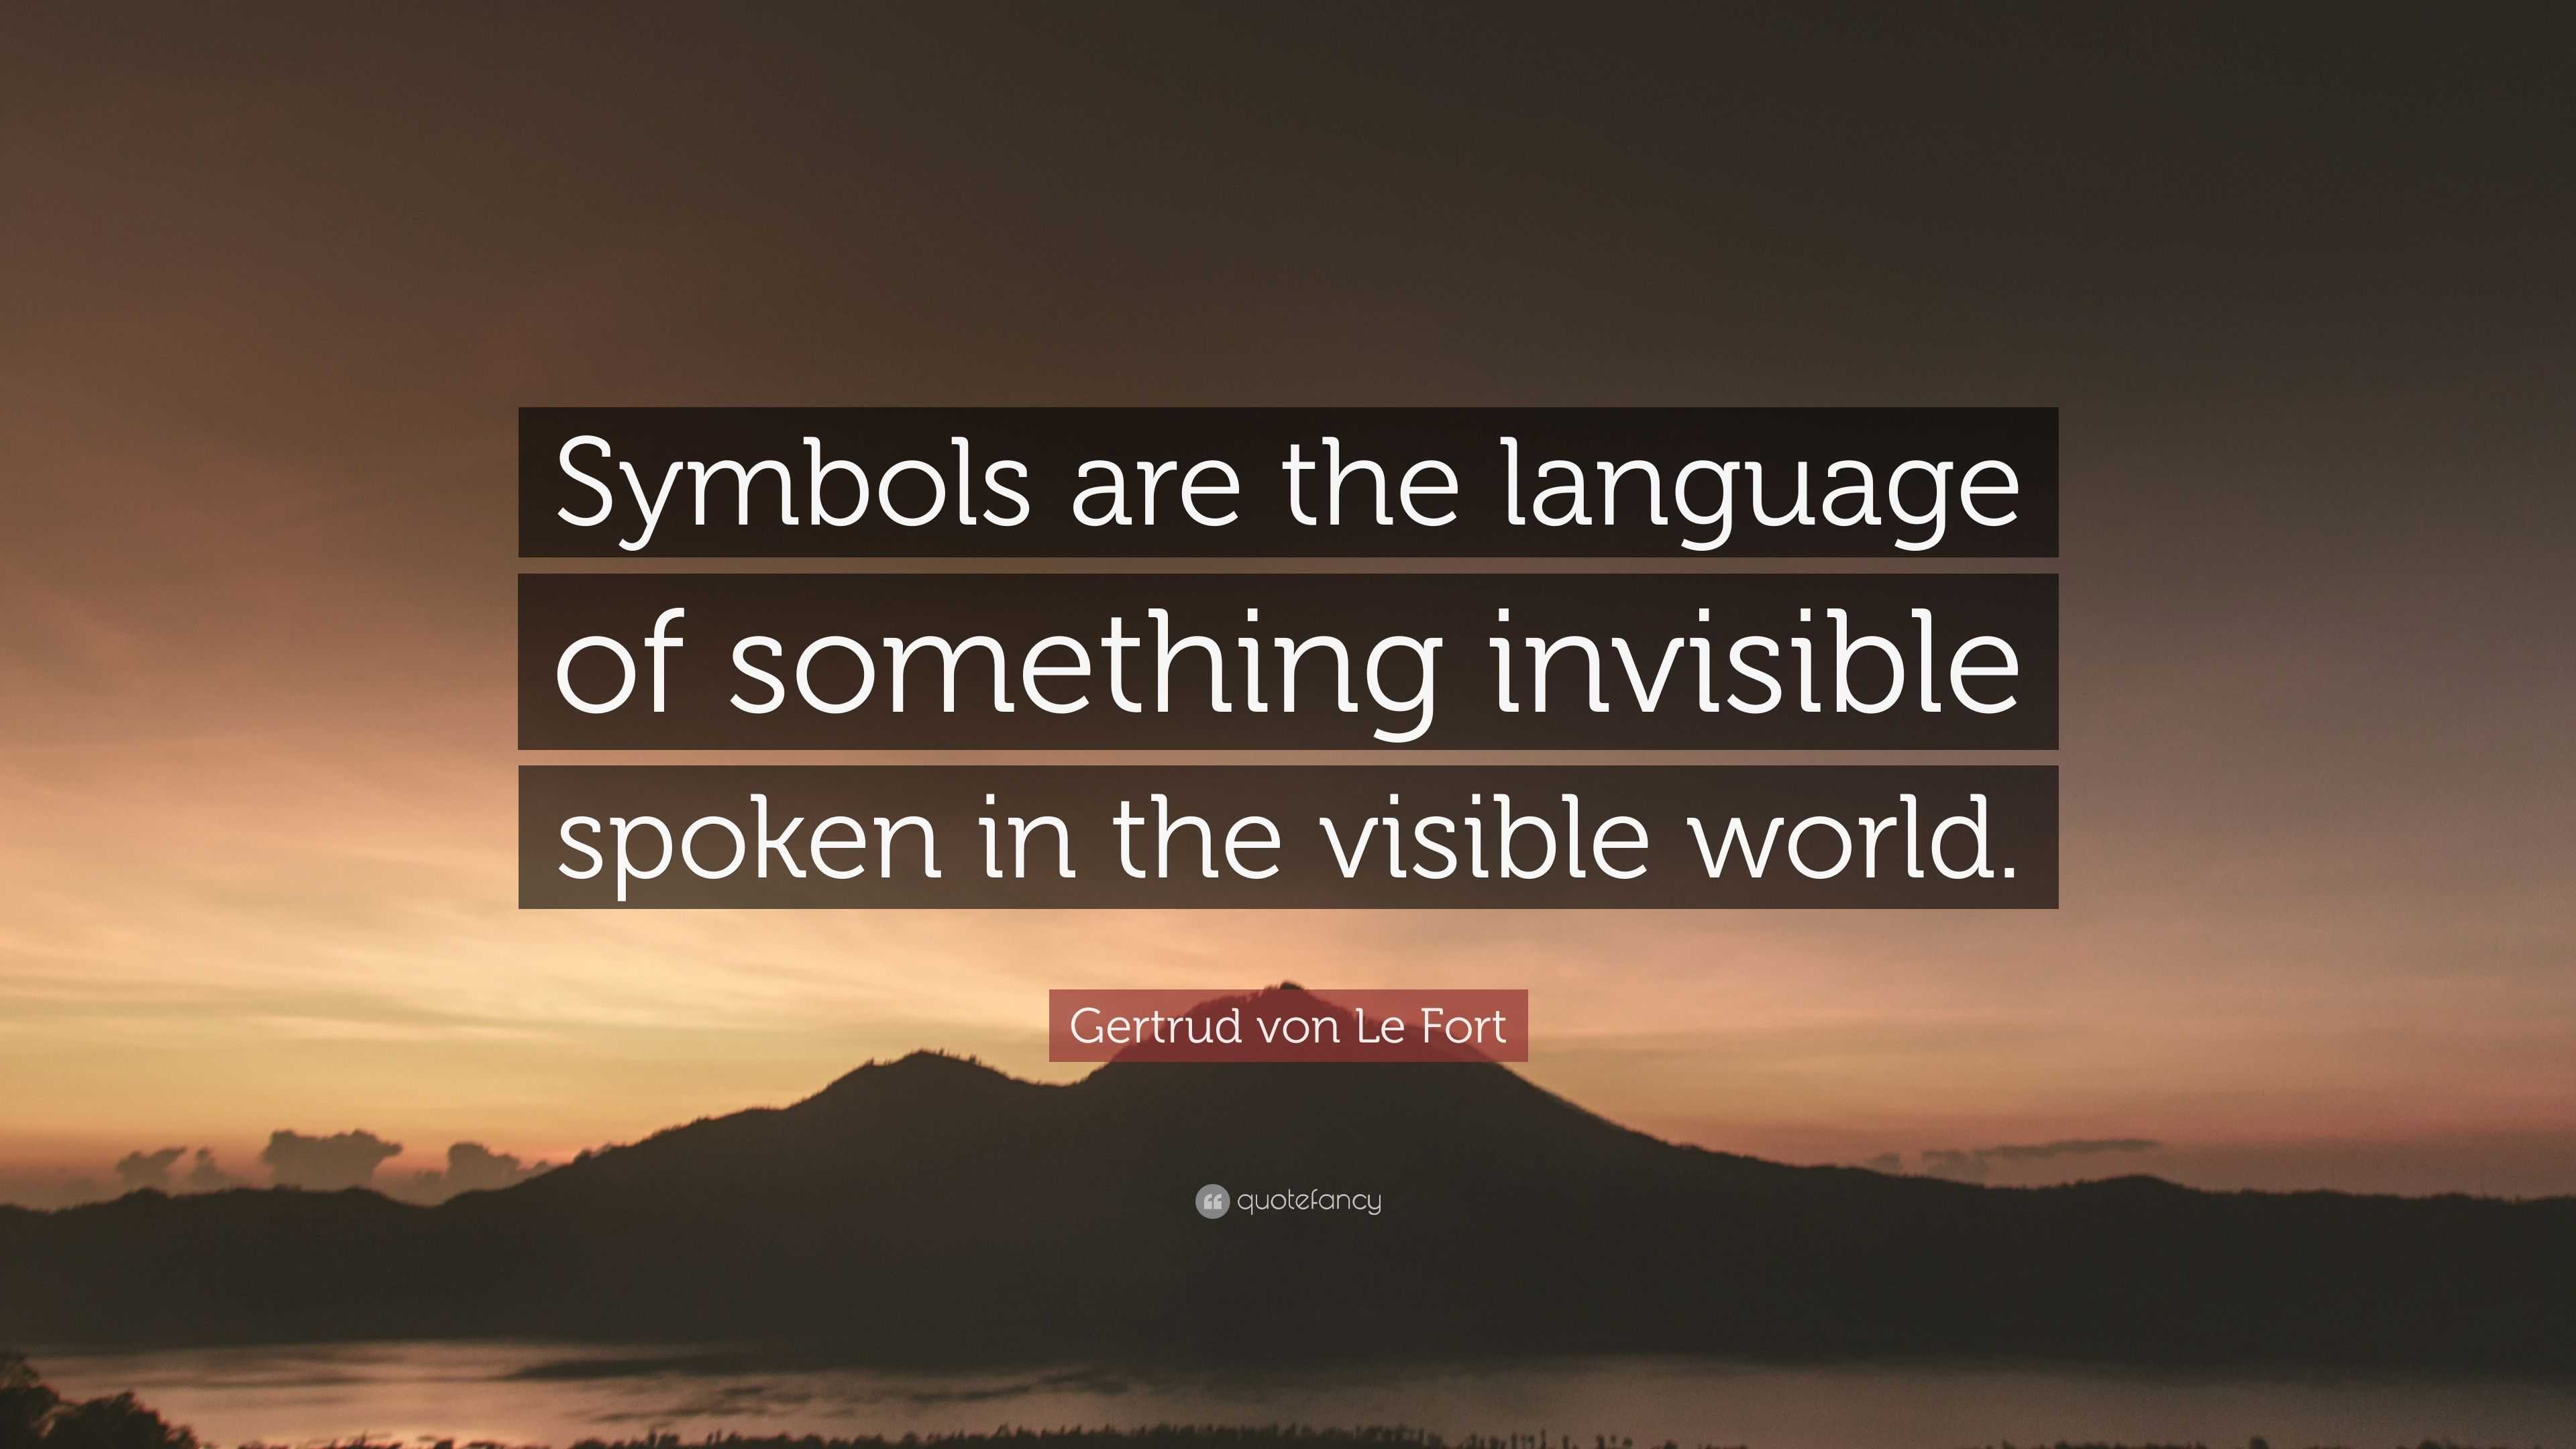 Gertrud von Le Fort Quote “Symbols are the language of something